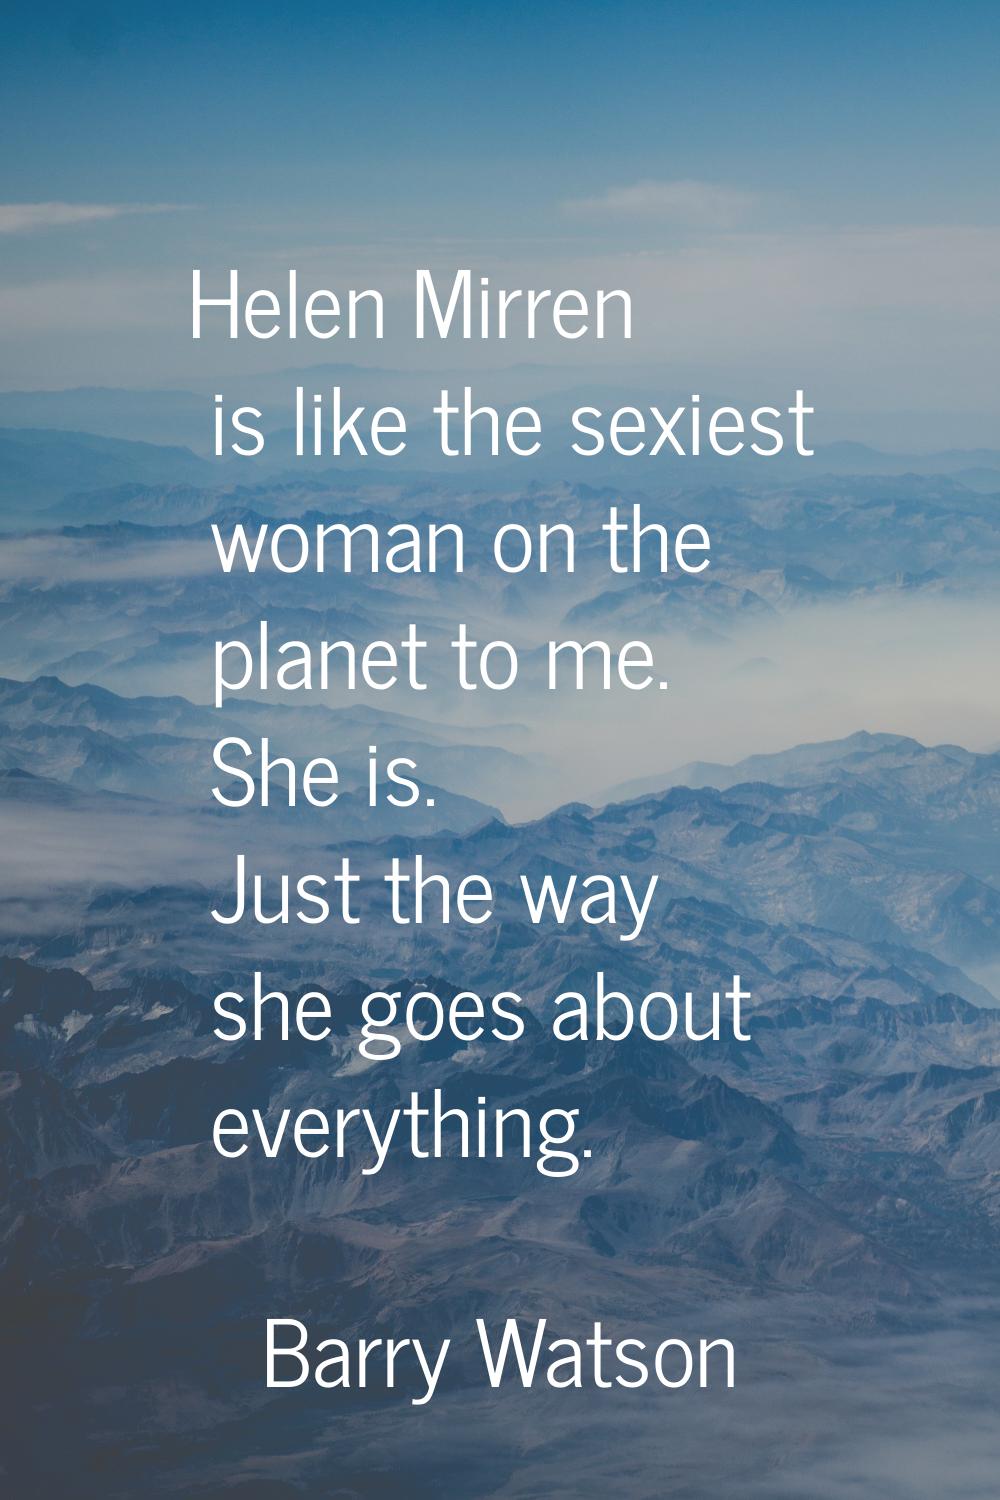 Helen Mirren is like the sexiest woman on the planet to me. She is. Just the way she goes about eve